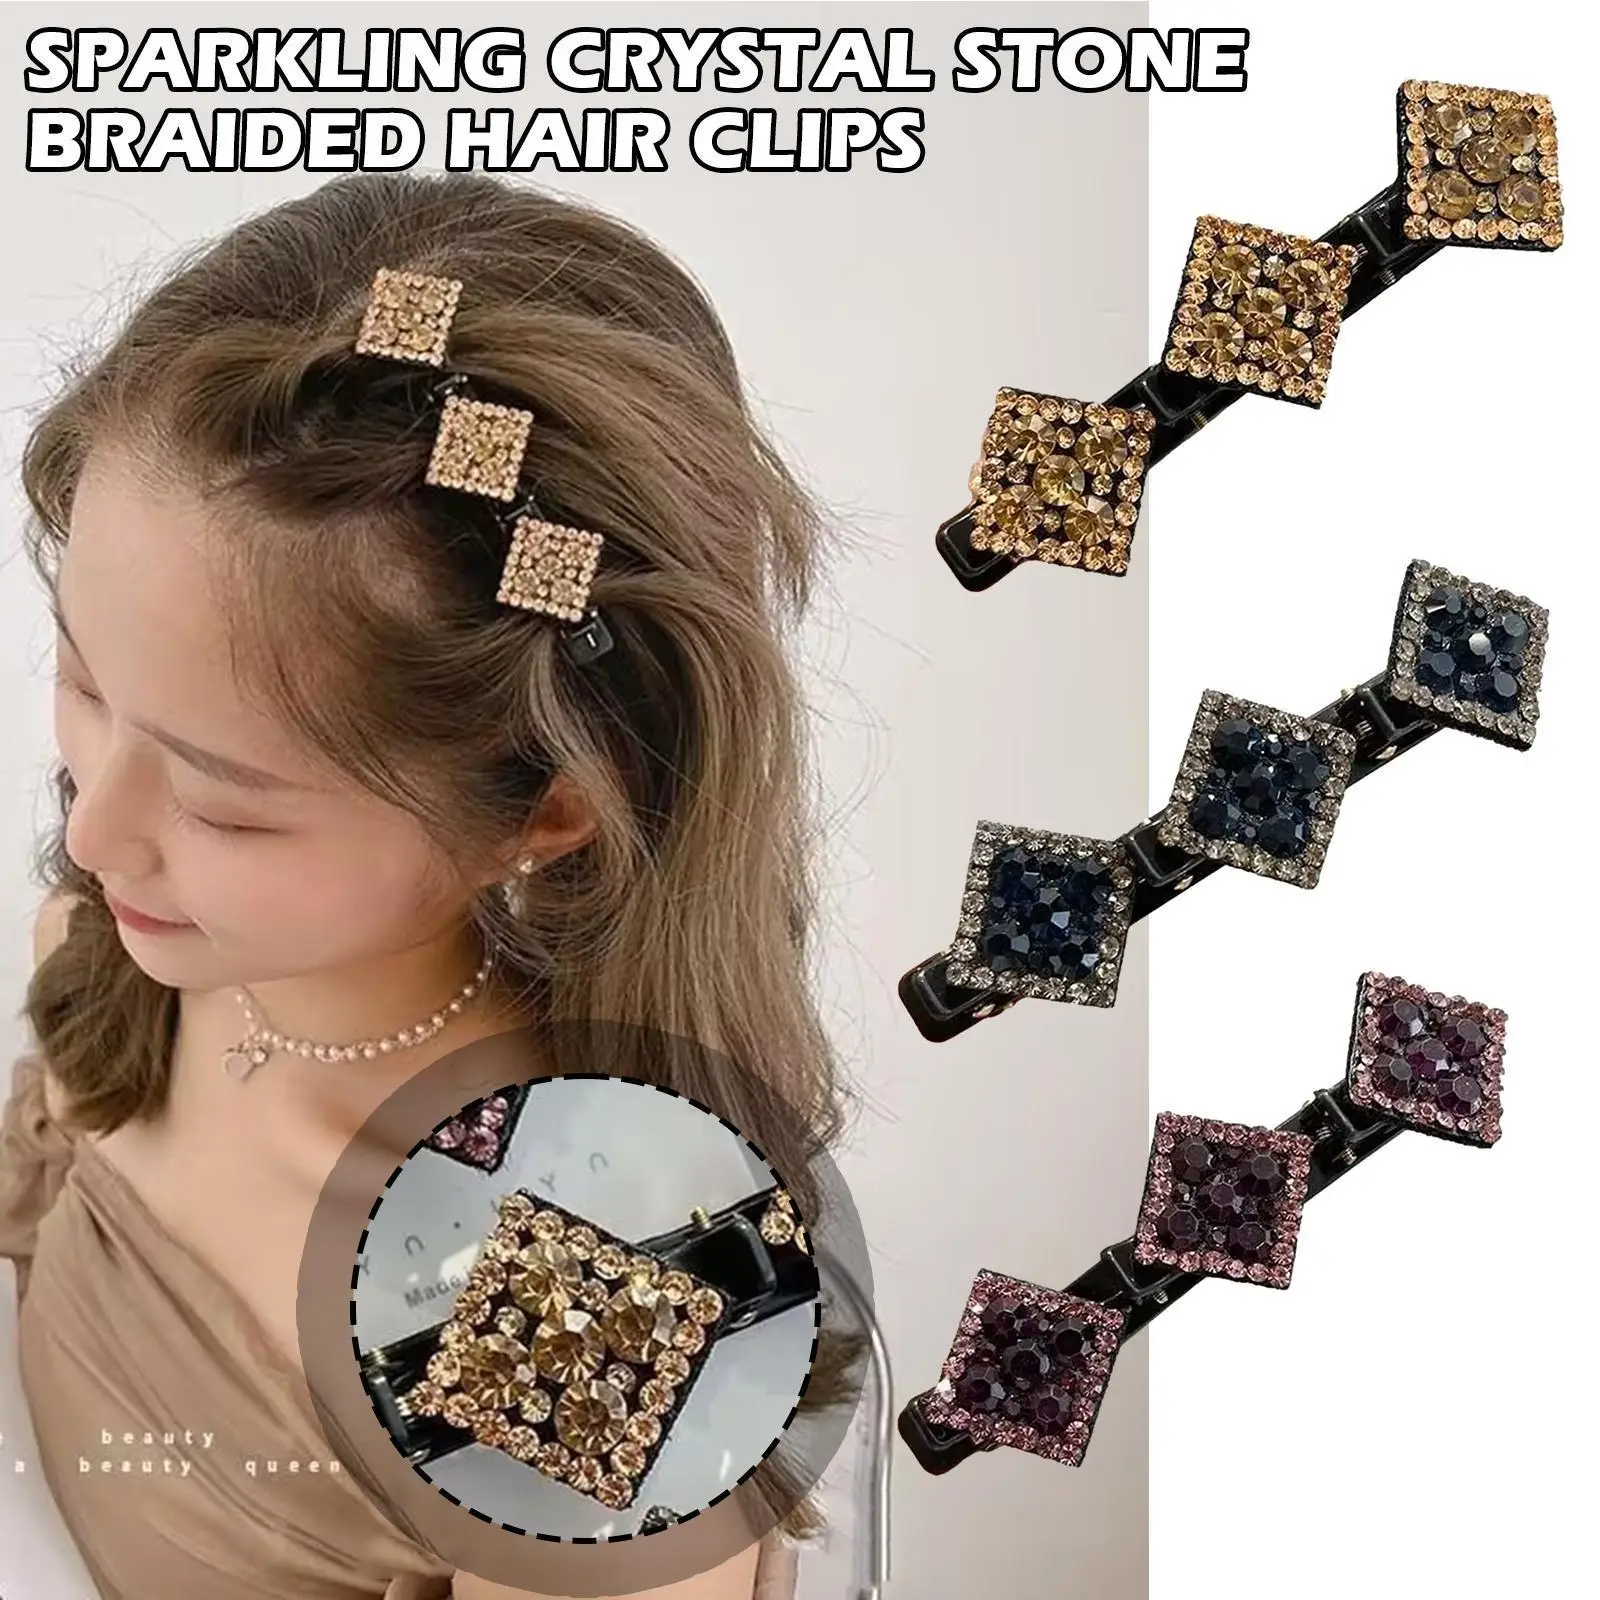 

Sparkling Crystal Stone Braided Hair Clips, Satin Rhinestone hairpin hairstyle Womens Double Fabric twist bangs Bands plait I8E7